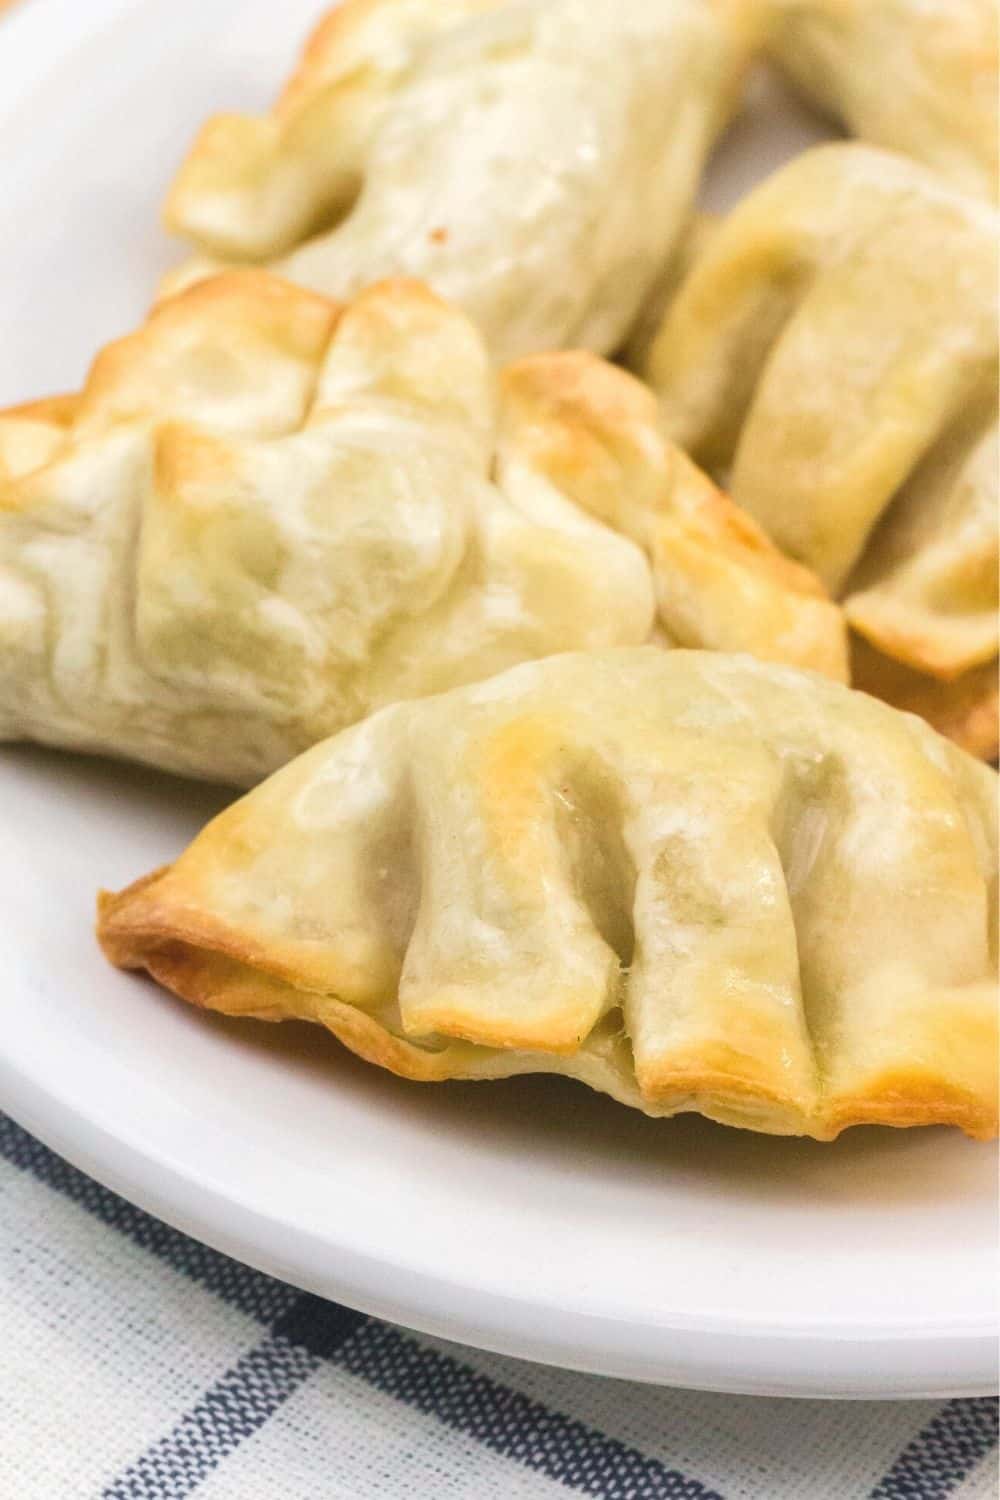 crispy golden-brown edges on an asian dumpling that was cooked in the air fryer